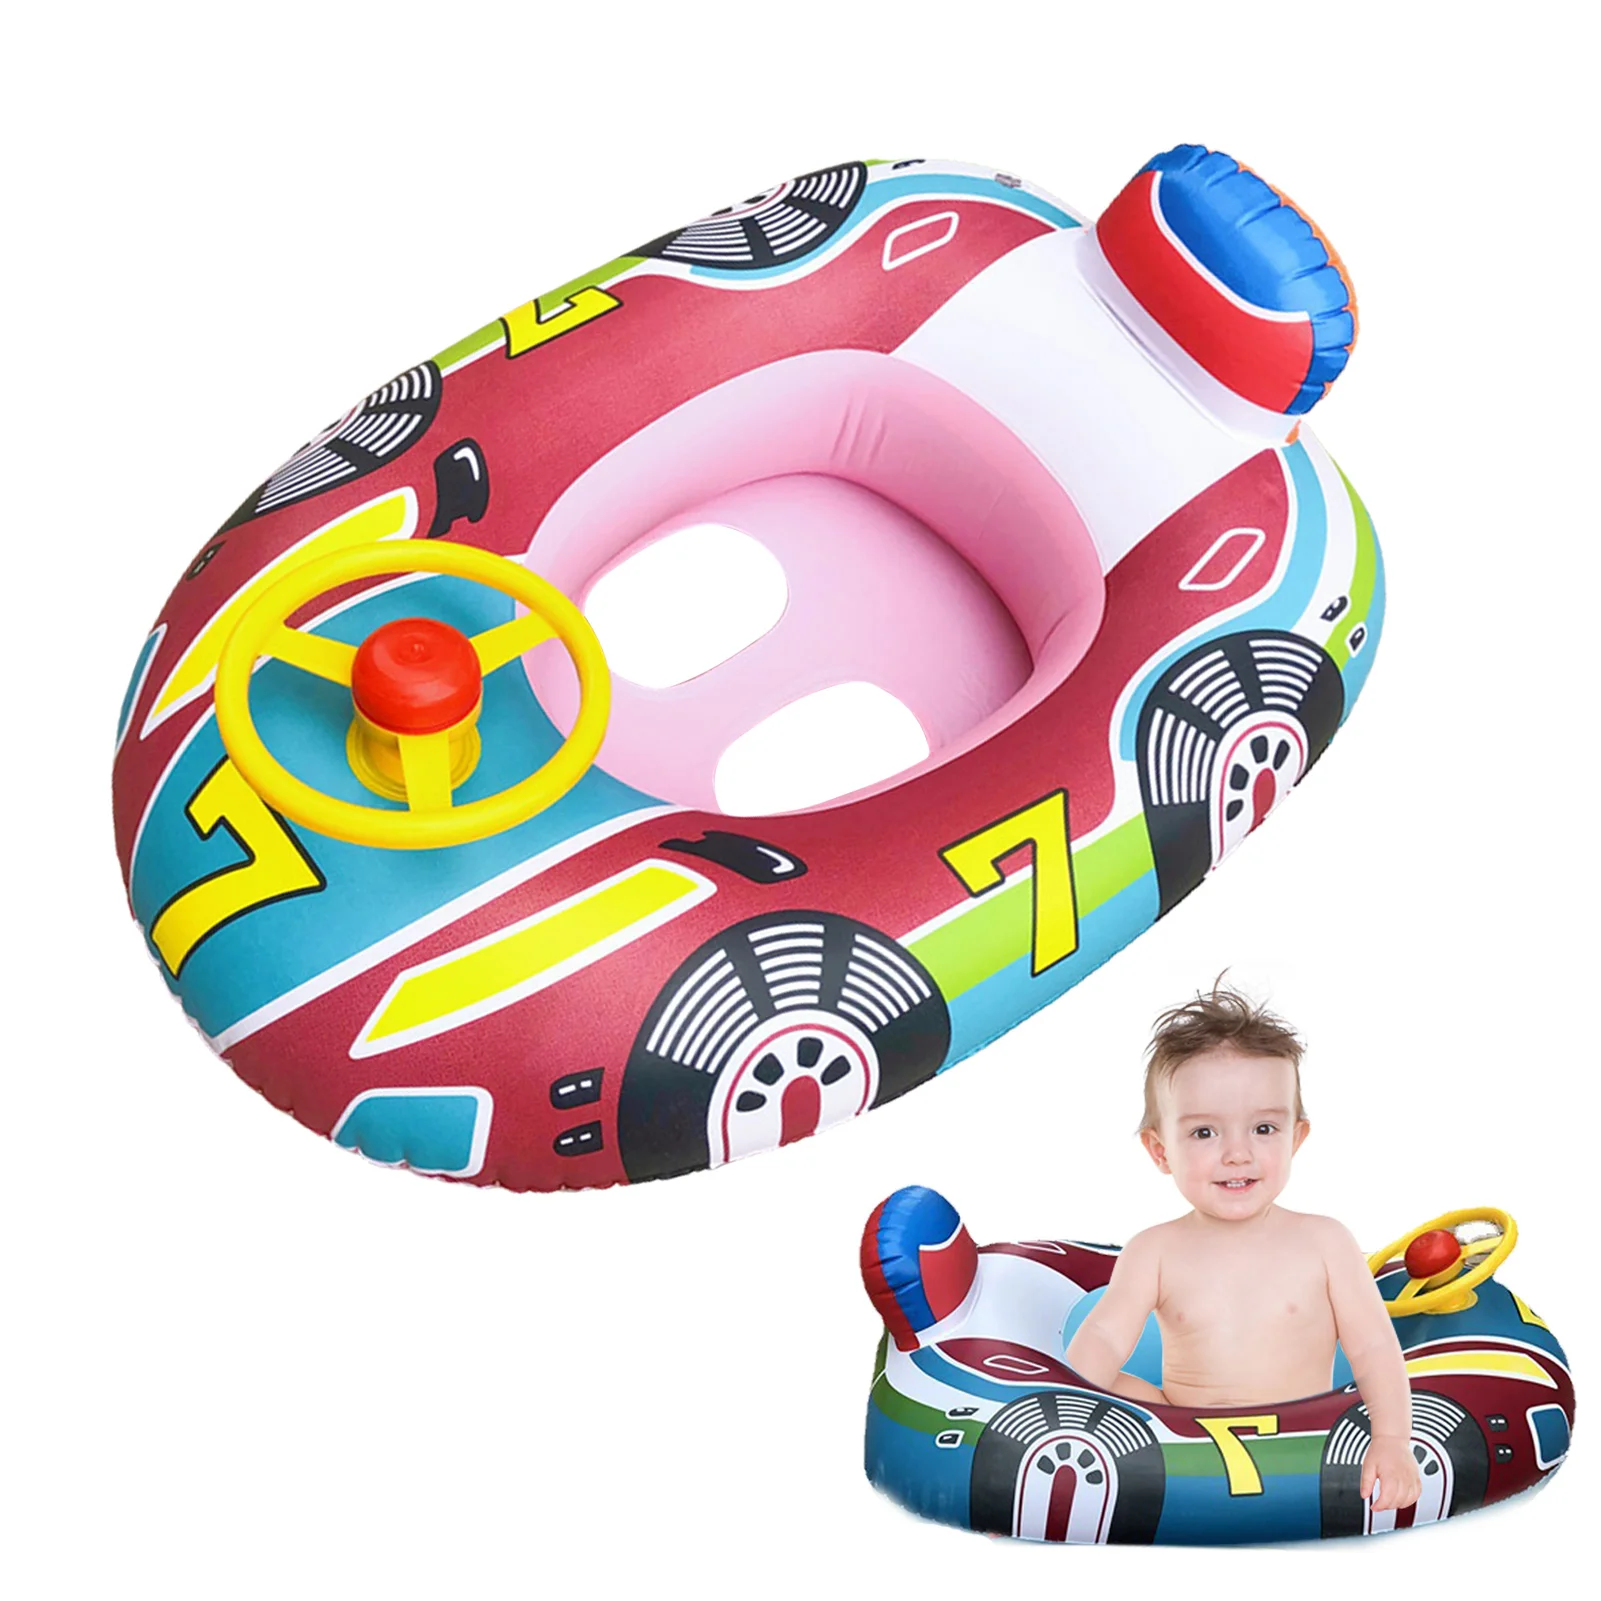 

Inflatable Babies Pool Float Car Pool Swim Floaties For Babies Toddlers Infants Ride-on Swimming Floats Pool Toys For Infant